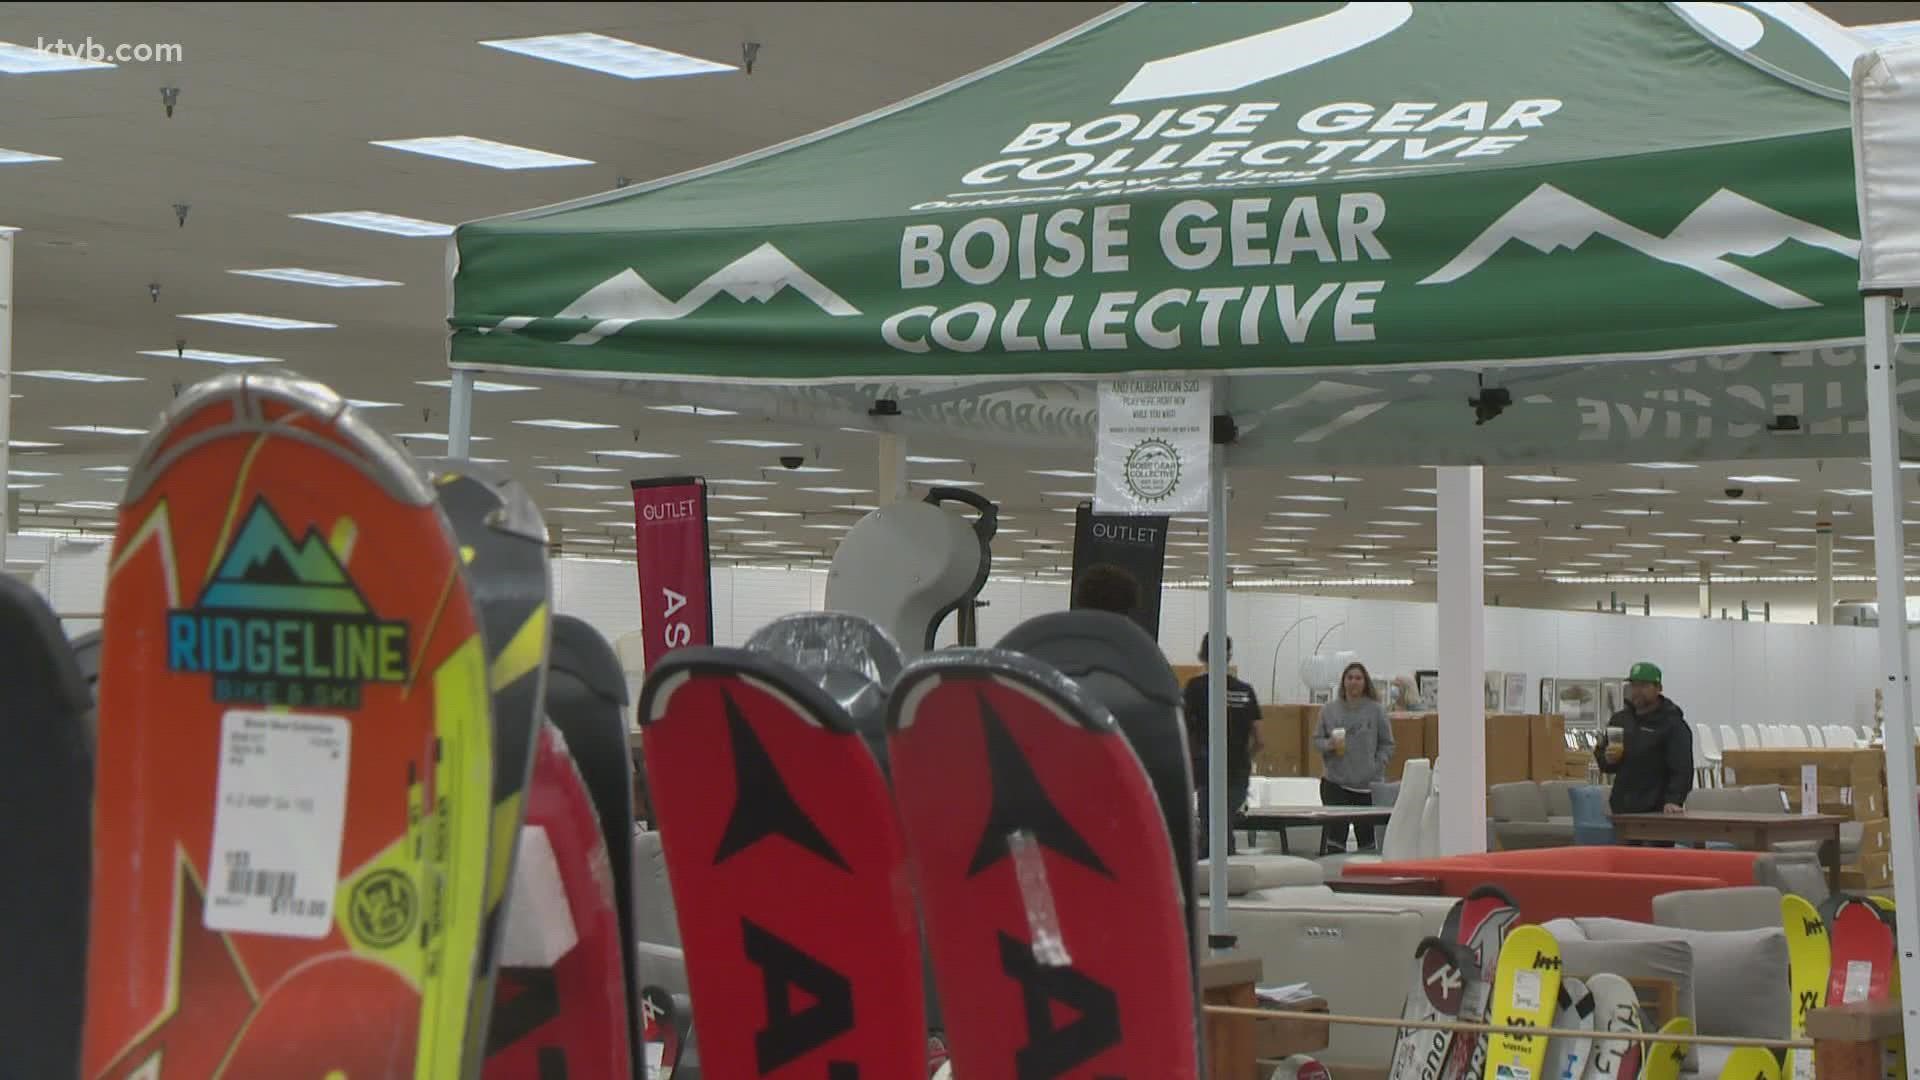 While the Boise Community Ski Swap gets people outfitted and ready to hit the sloped, they're also giving all Idahoans an opportunity to enjoy the winter season.